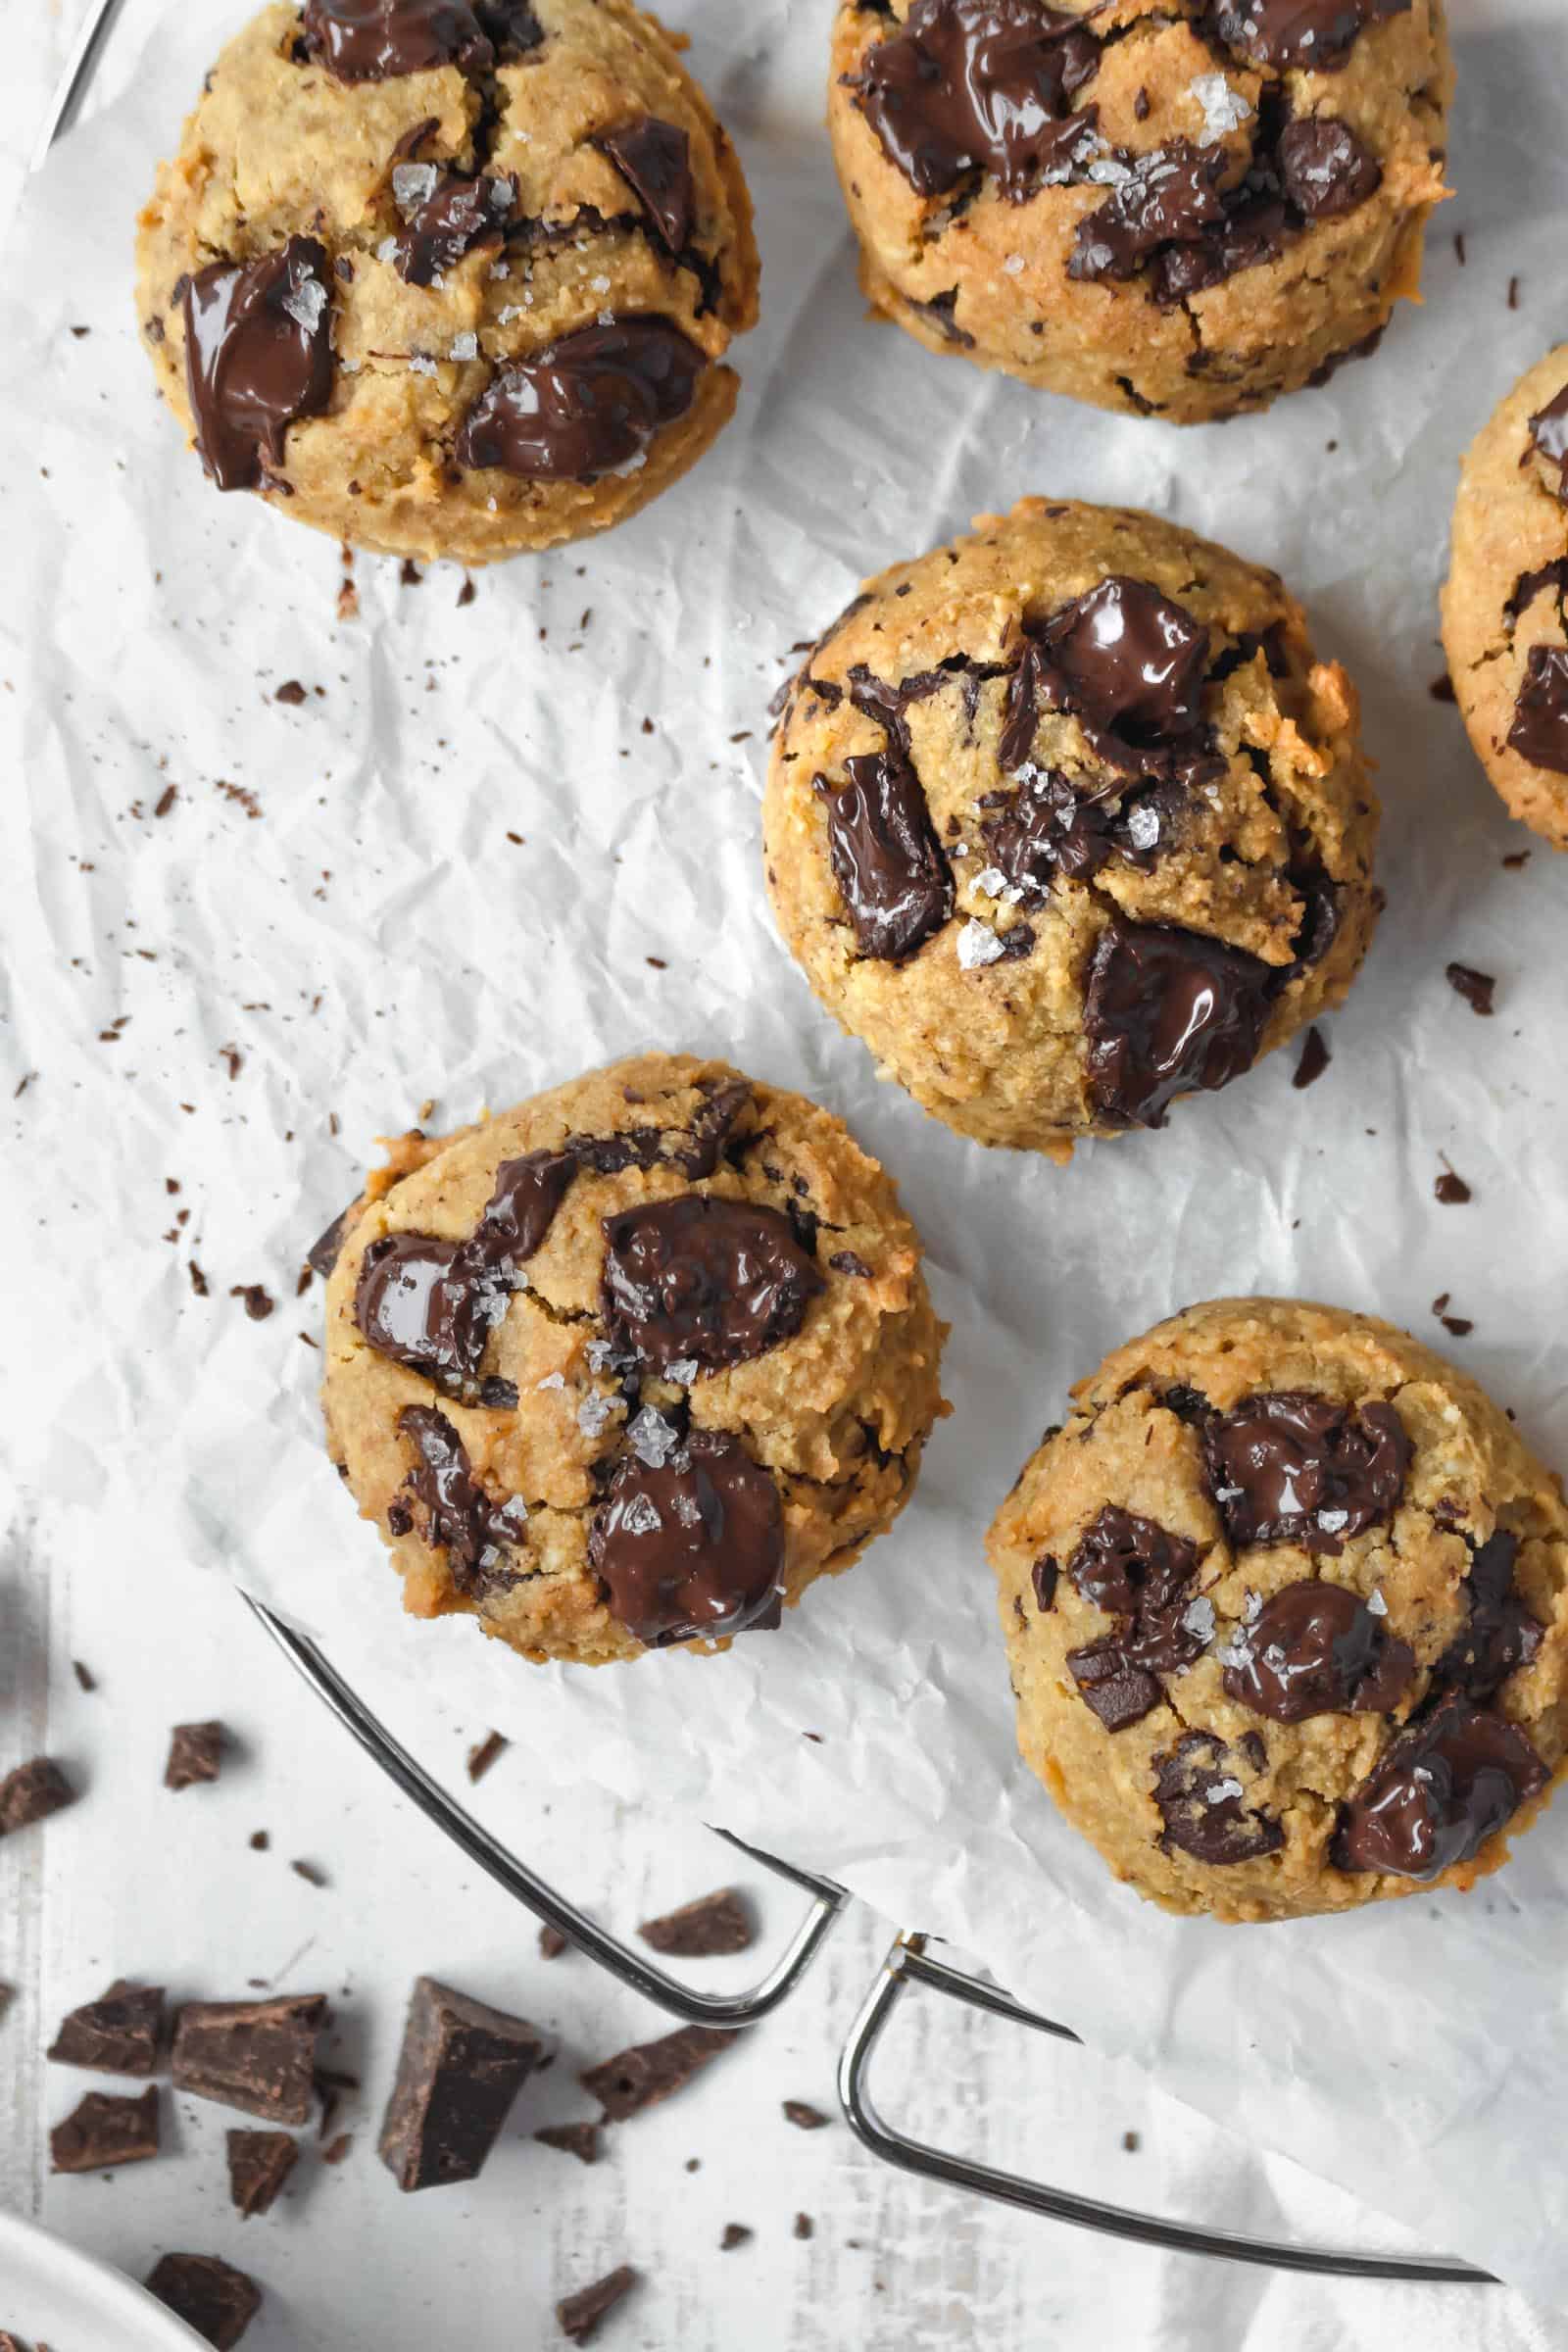 These chickpea chocolate chip cookies are easy, delicious, vegan, and gluten-free! You won't be able to tell they're healthier than the classic cookie! #chickpeacookies #chocolatechipcookies #glutenfreecookies #vegancookies #veganglutenfre